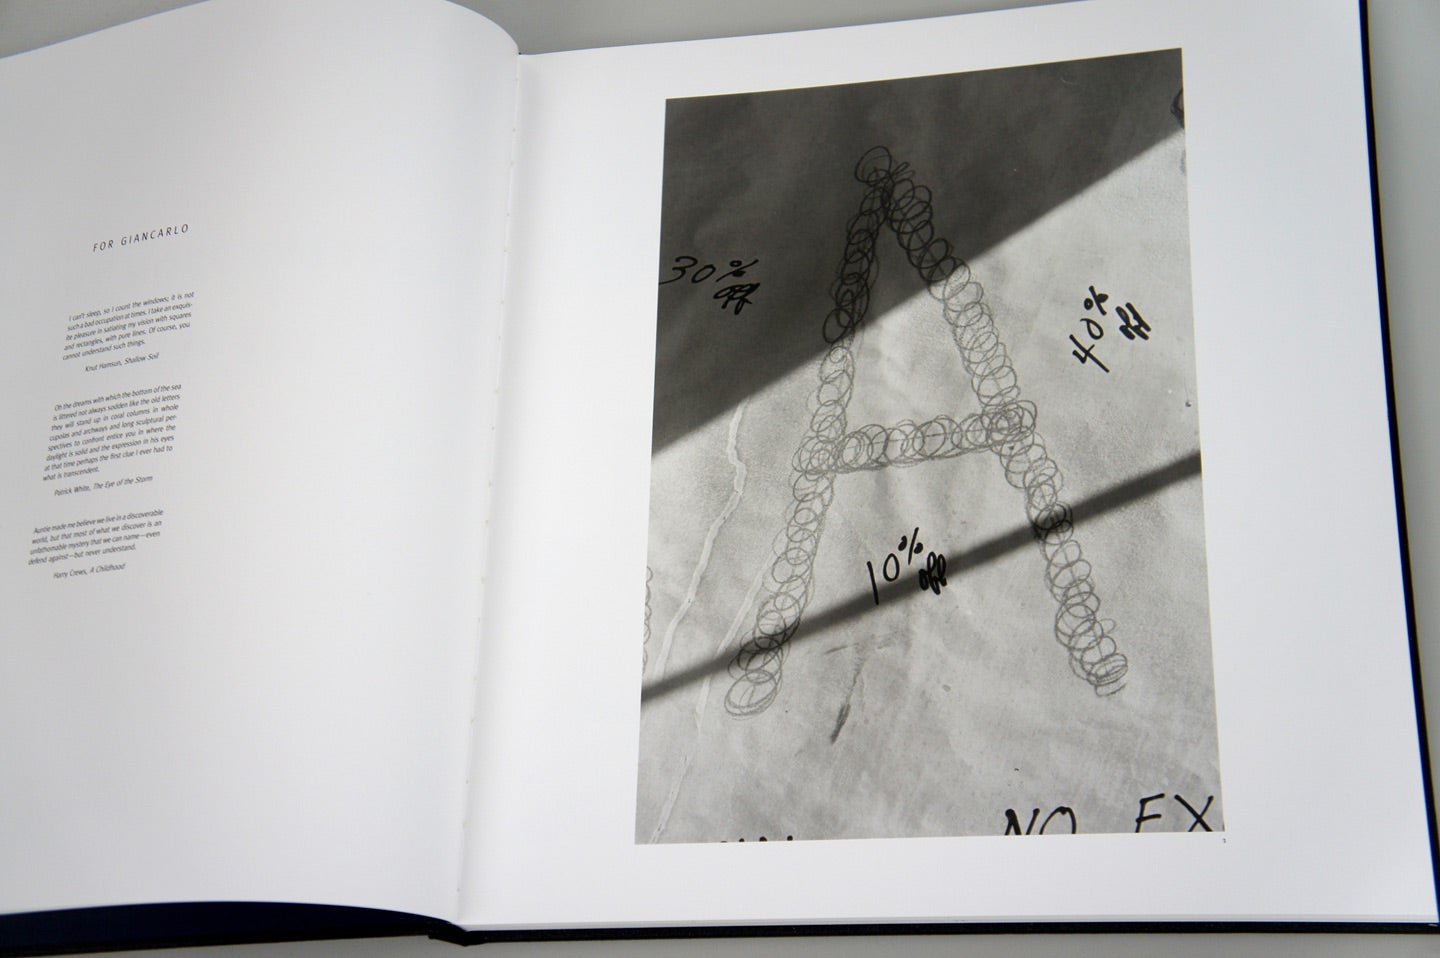 Lee Friedlander: Letters from the People (Special Limited Edition with One Vintage Gelatin Silver Print: "6")